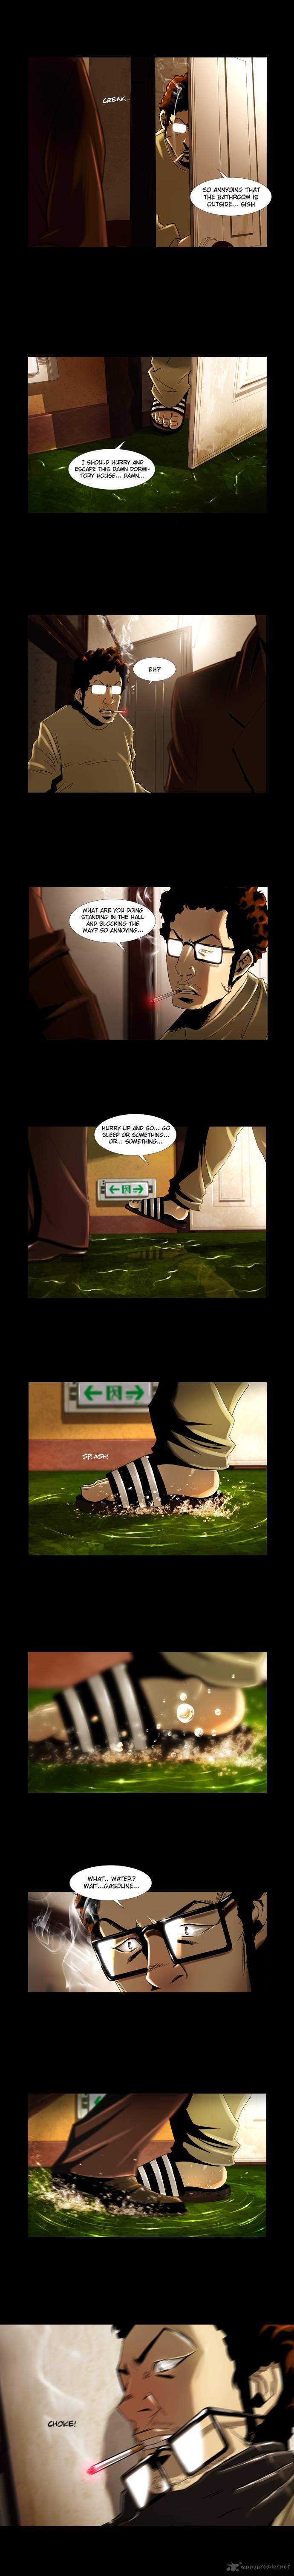 Marionette Chapter 1 Page 3